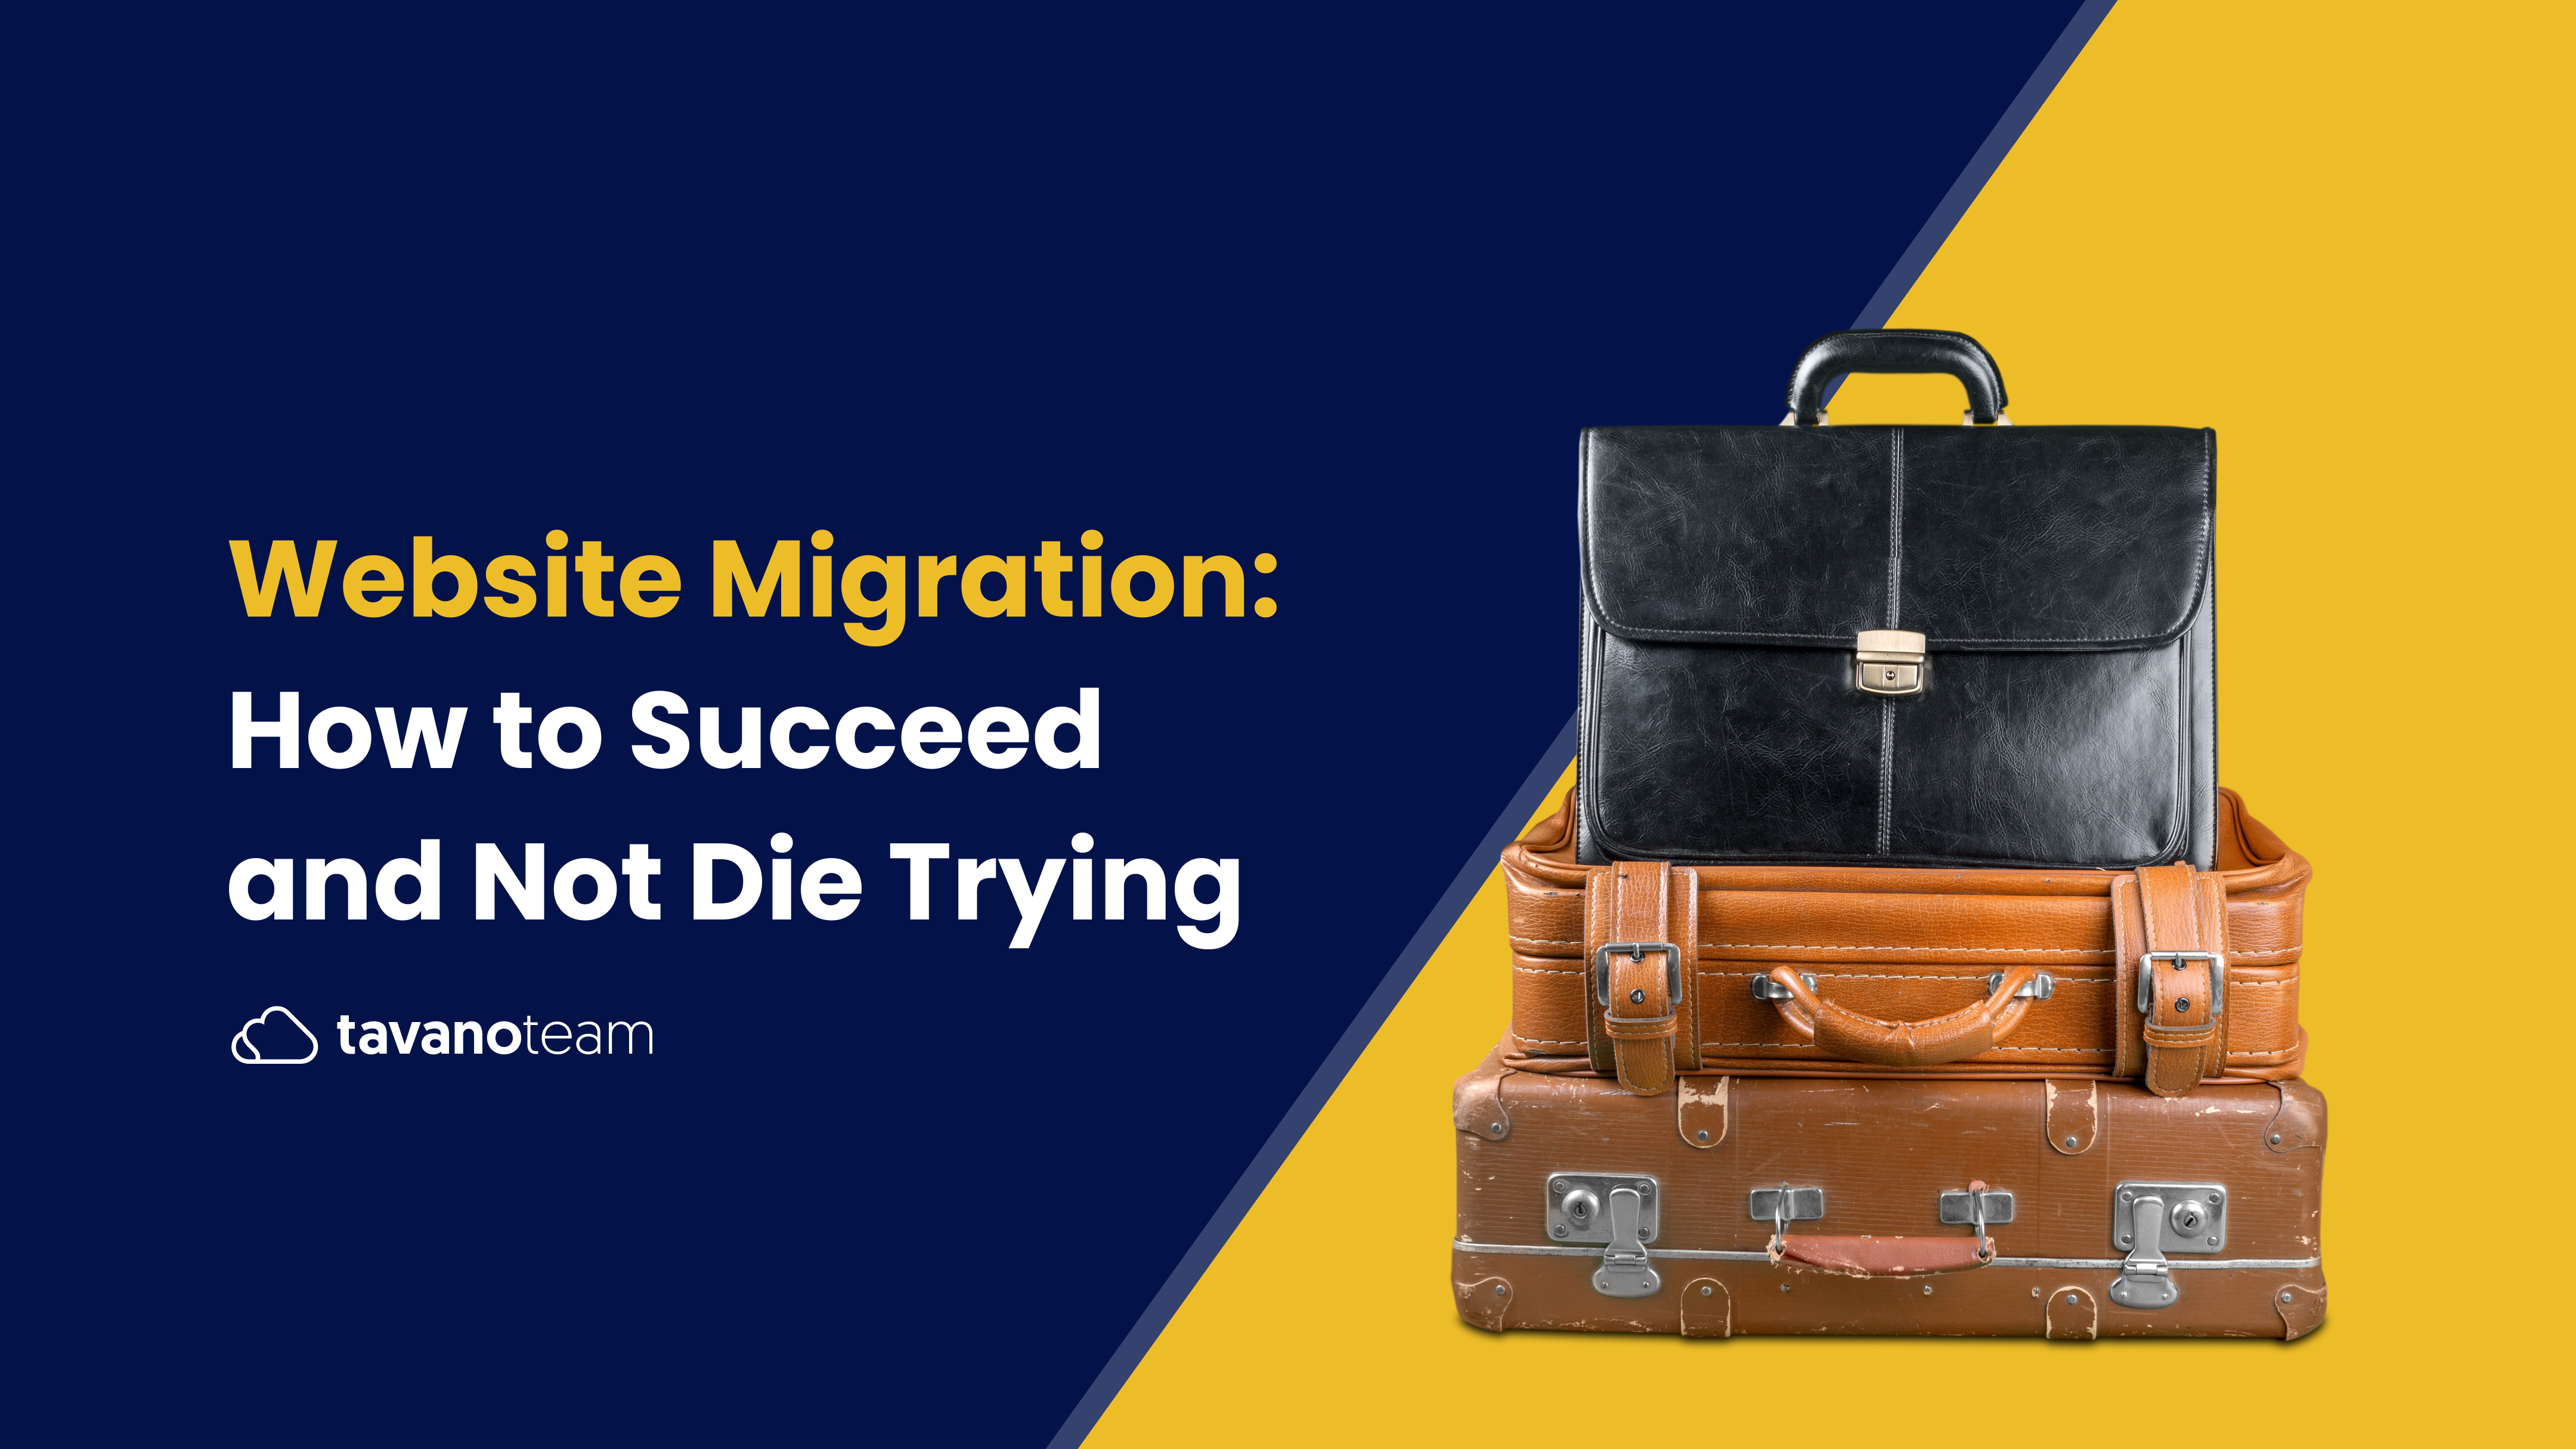 eCommerce-website-migration-how-to-succeed-and-not-die-trying